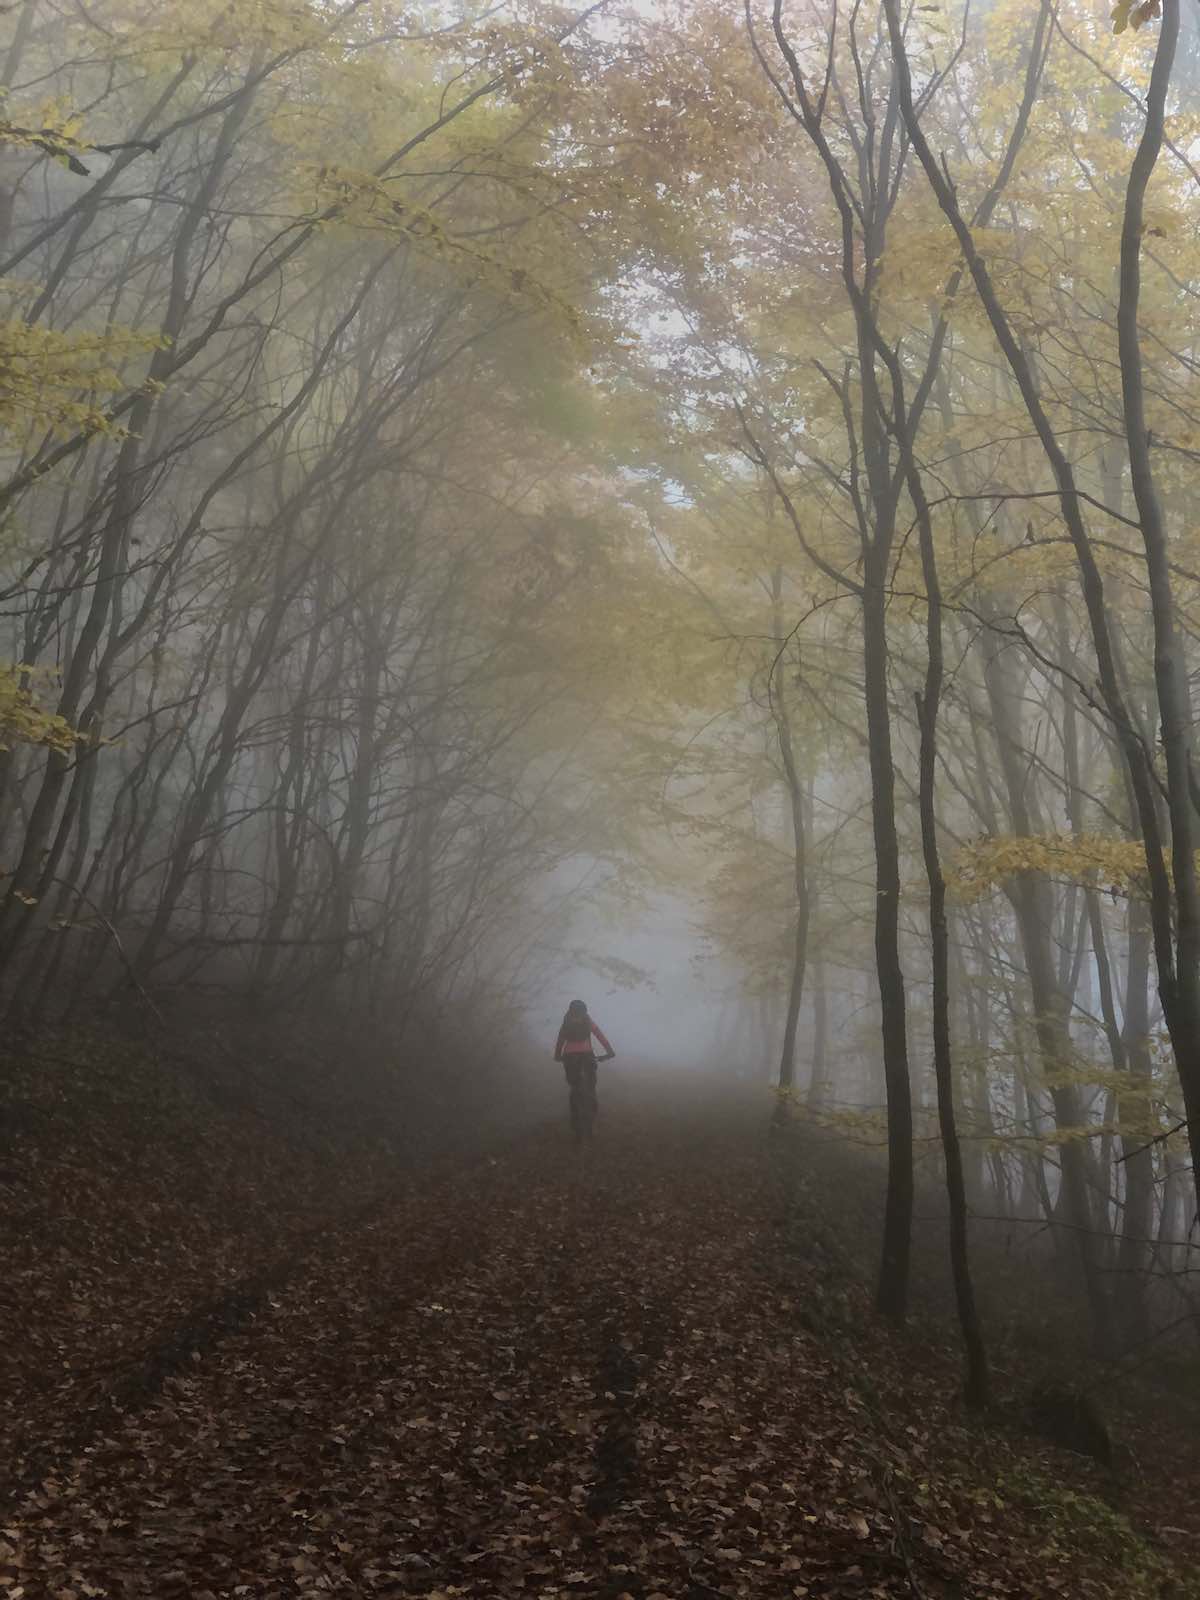 bikerumor pic of the day mountain bike rider riding down a trail covered in fallen leaves surrounded by trees with yellow autumn leaves in the fog.